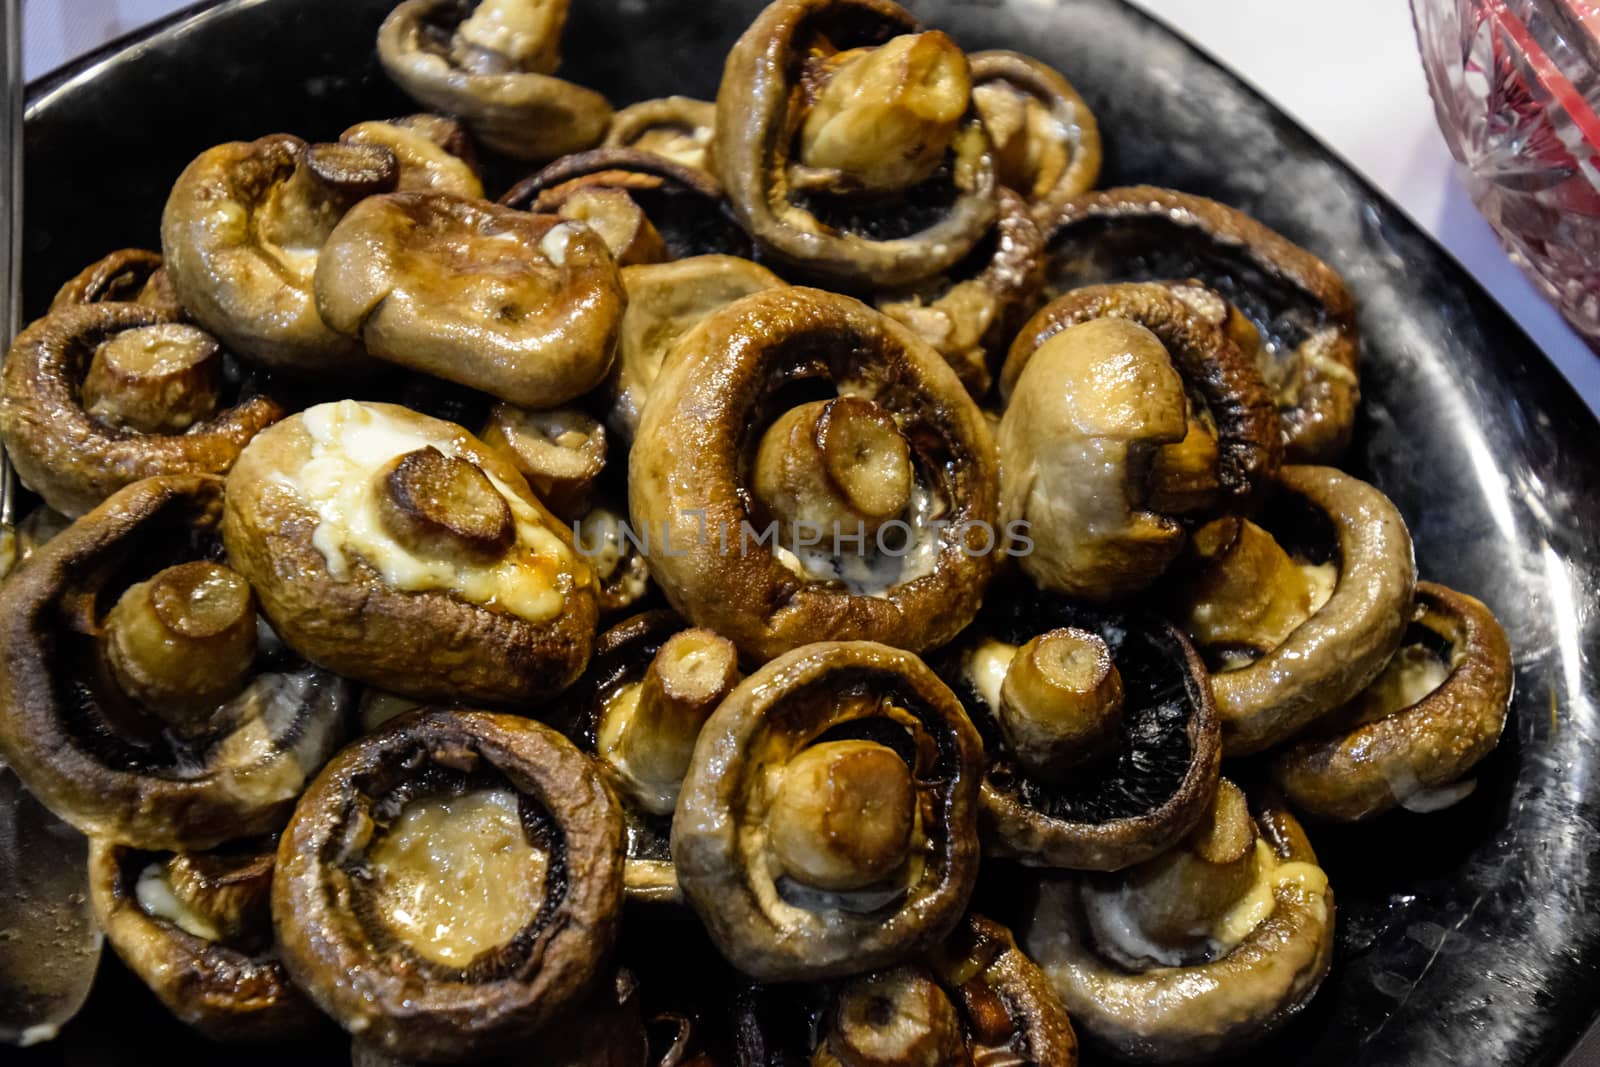 Baked mushrooms in a plate. fried mushrooms with mayonnaise.